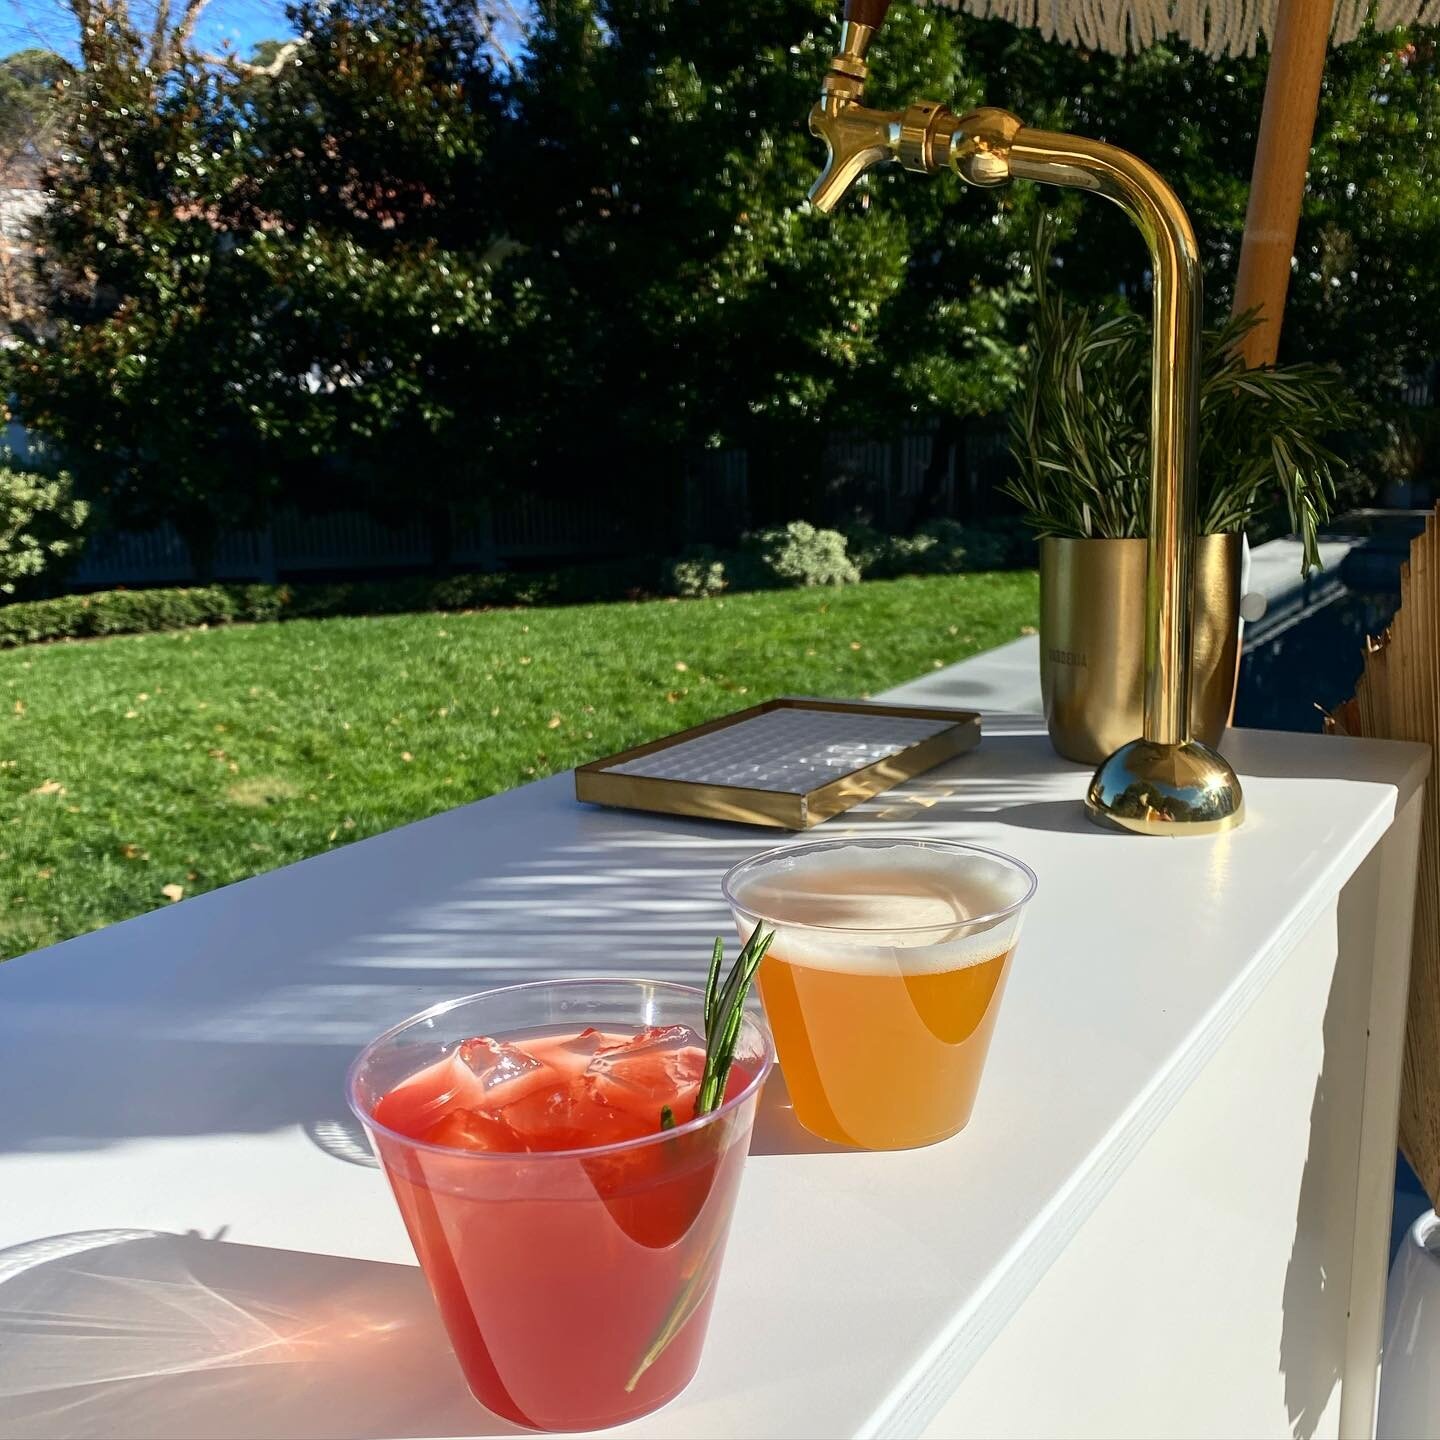 Did you know we can do cocktails and beer on draft from our bar cart?!?! 🍺 🍹
.
.
.
DM us if you&rsquo;re interested in booking an event! ❤️
.
.
.
#happycamperbarco #mobilebar #mobilebartender #barcart #vabeach #757events #